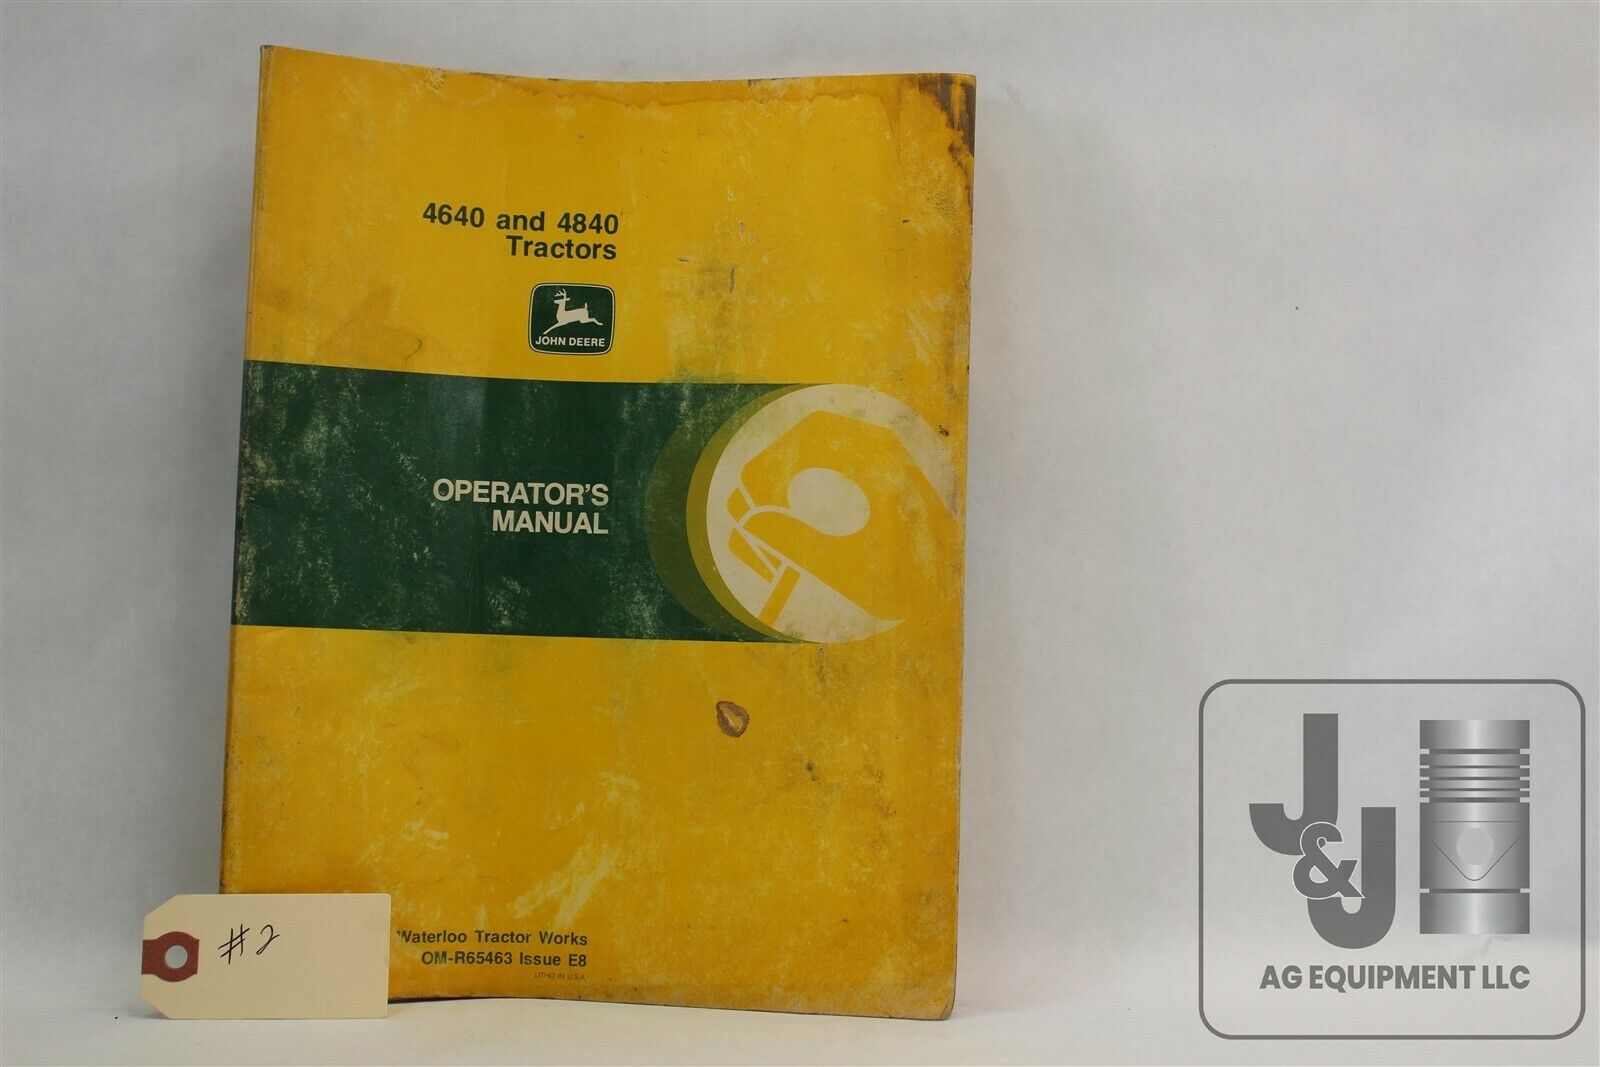 JOHN DEERE 4640 AND 4840 #2 TRACTOR OPERATOR'S MANUAL OM-R65463 ISSUE E8